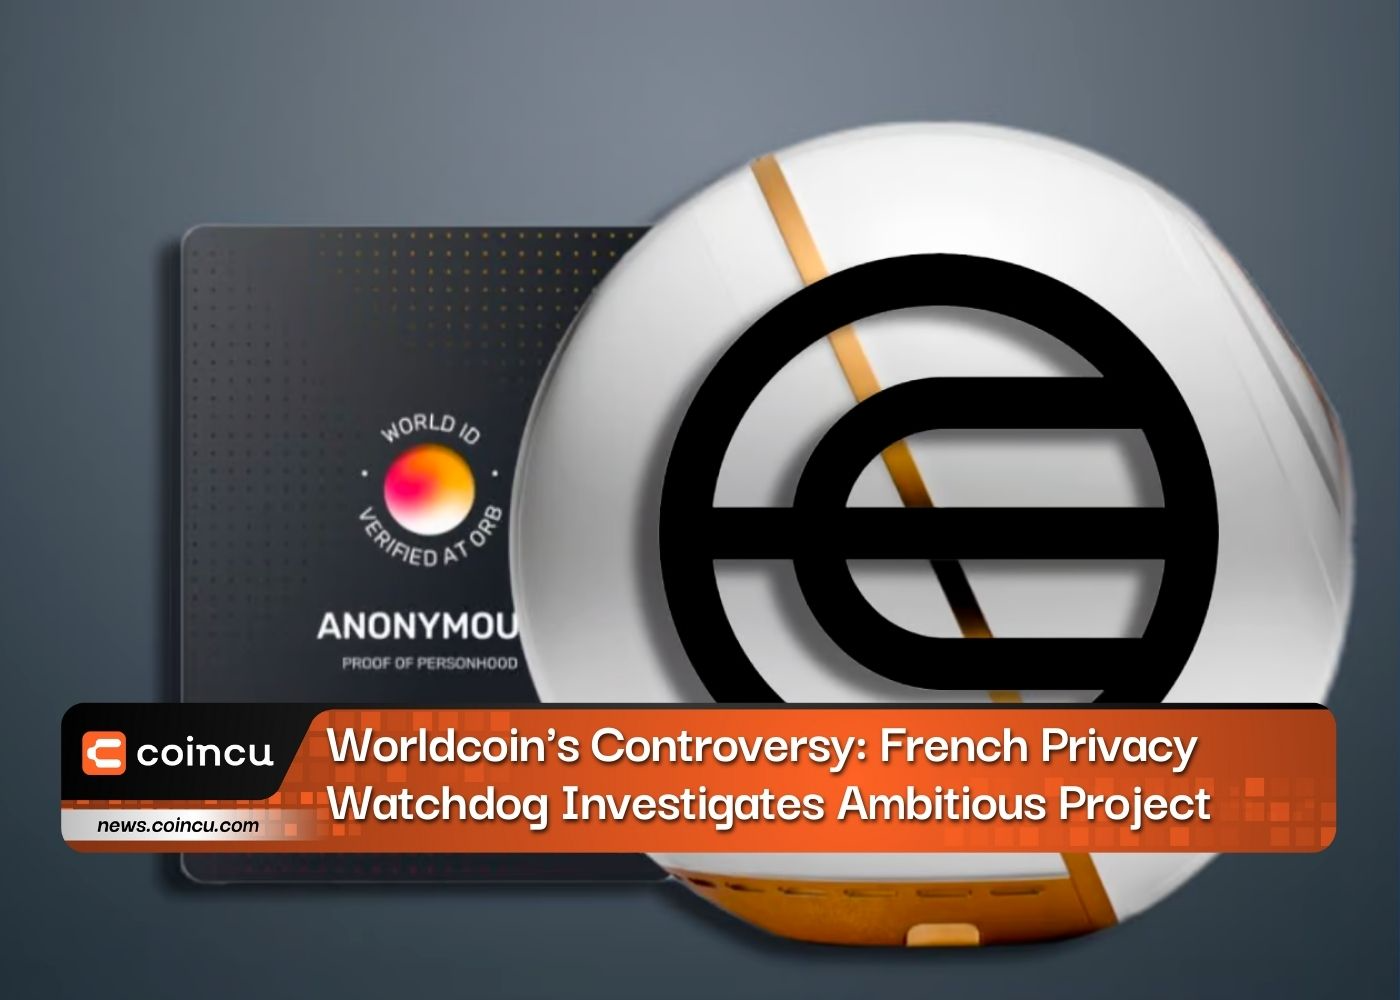 Worldcoin's Controversy: French Privacy Watchdog Investigates Ambitious Project